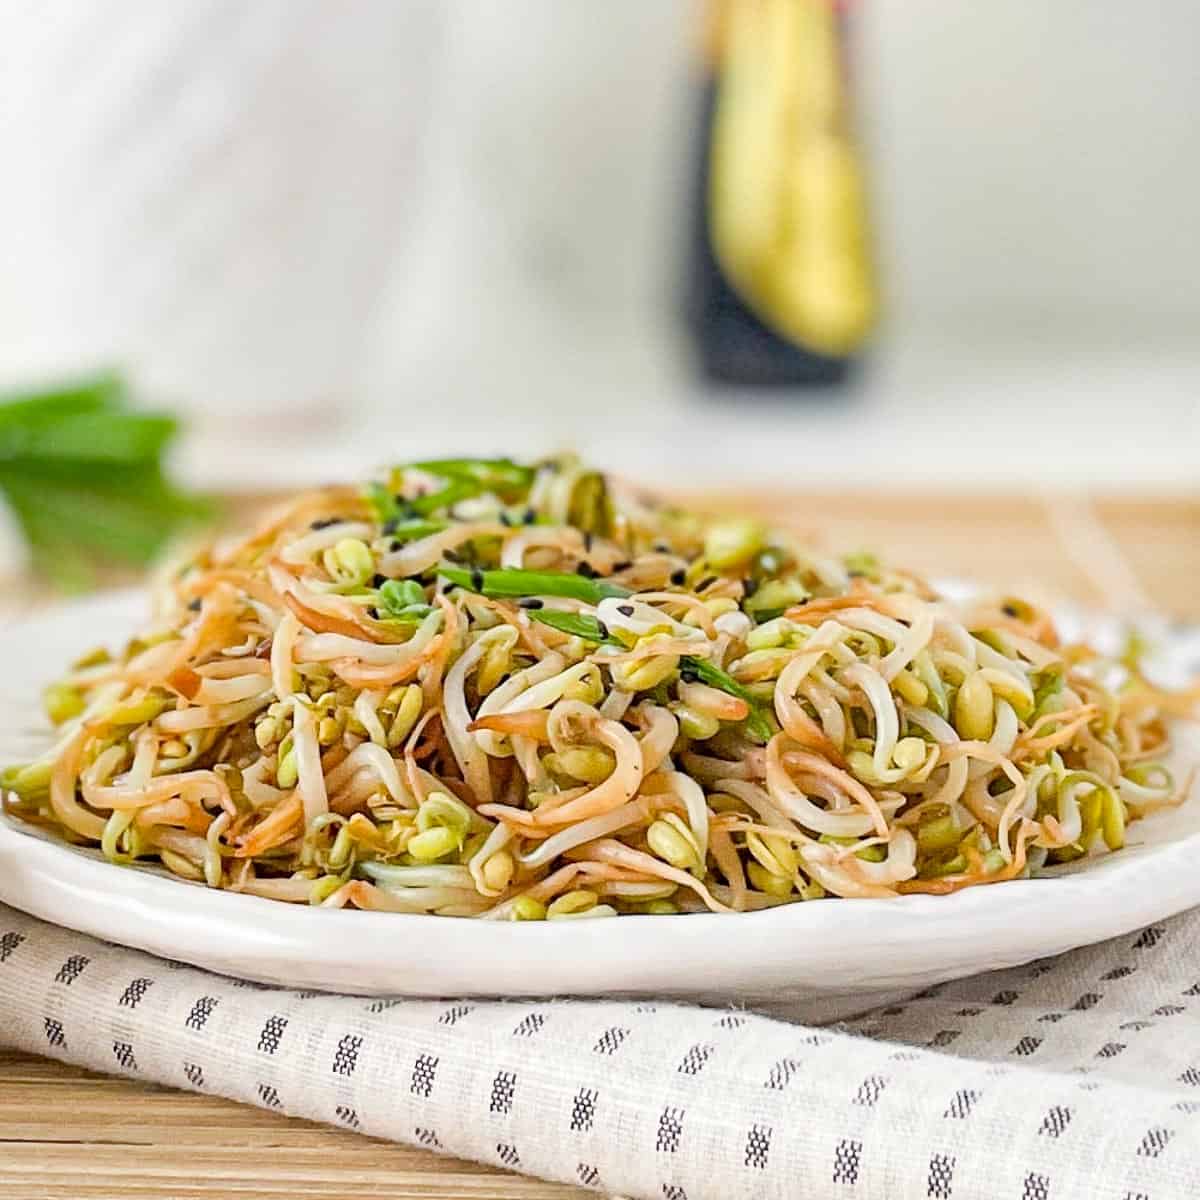 Plate of stir fried bean sprouts